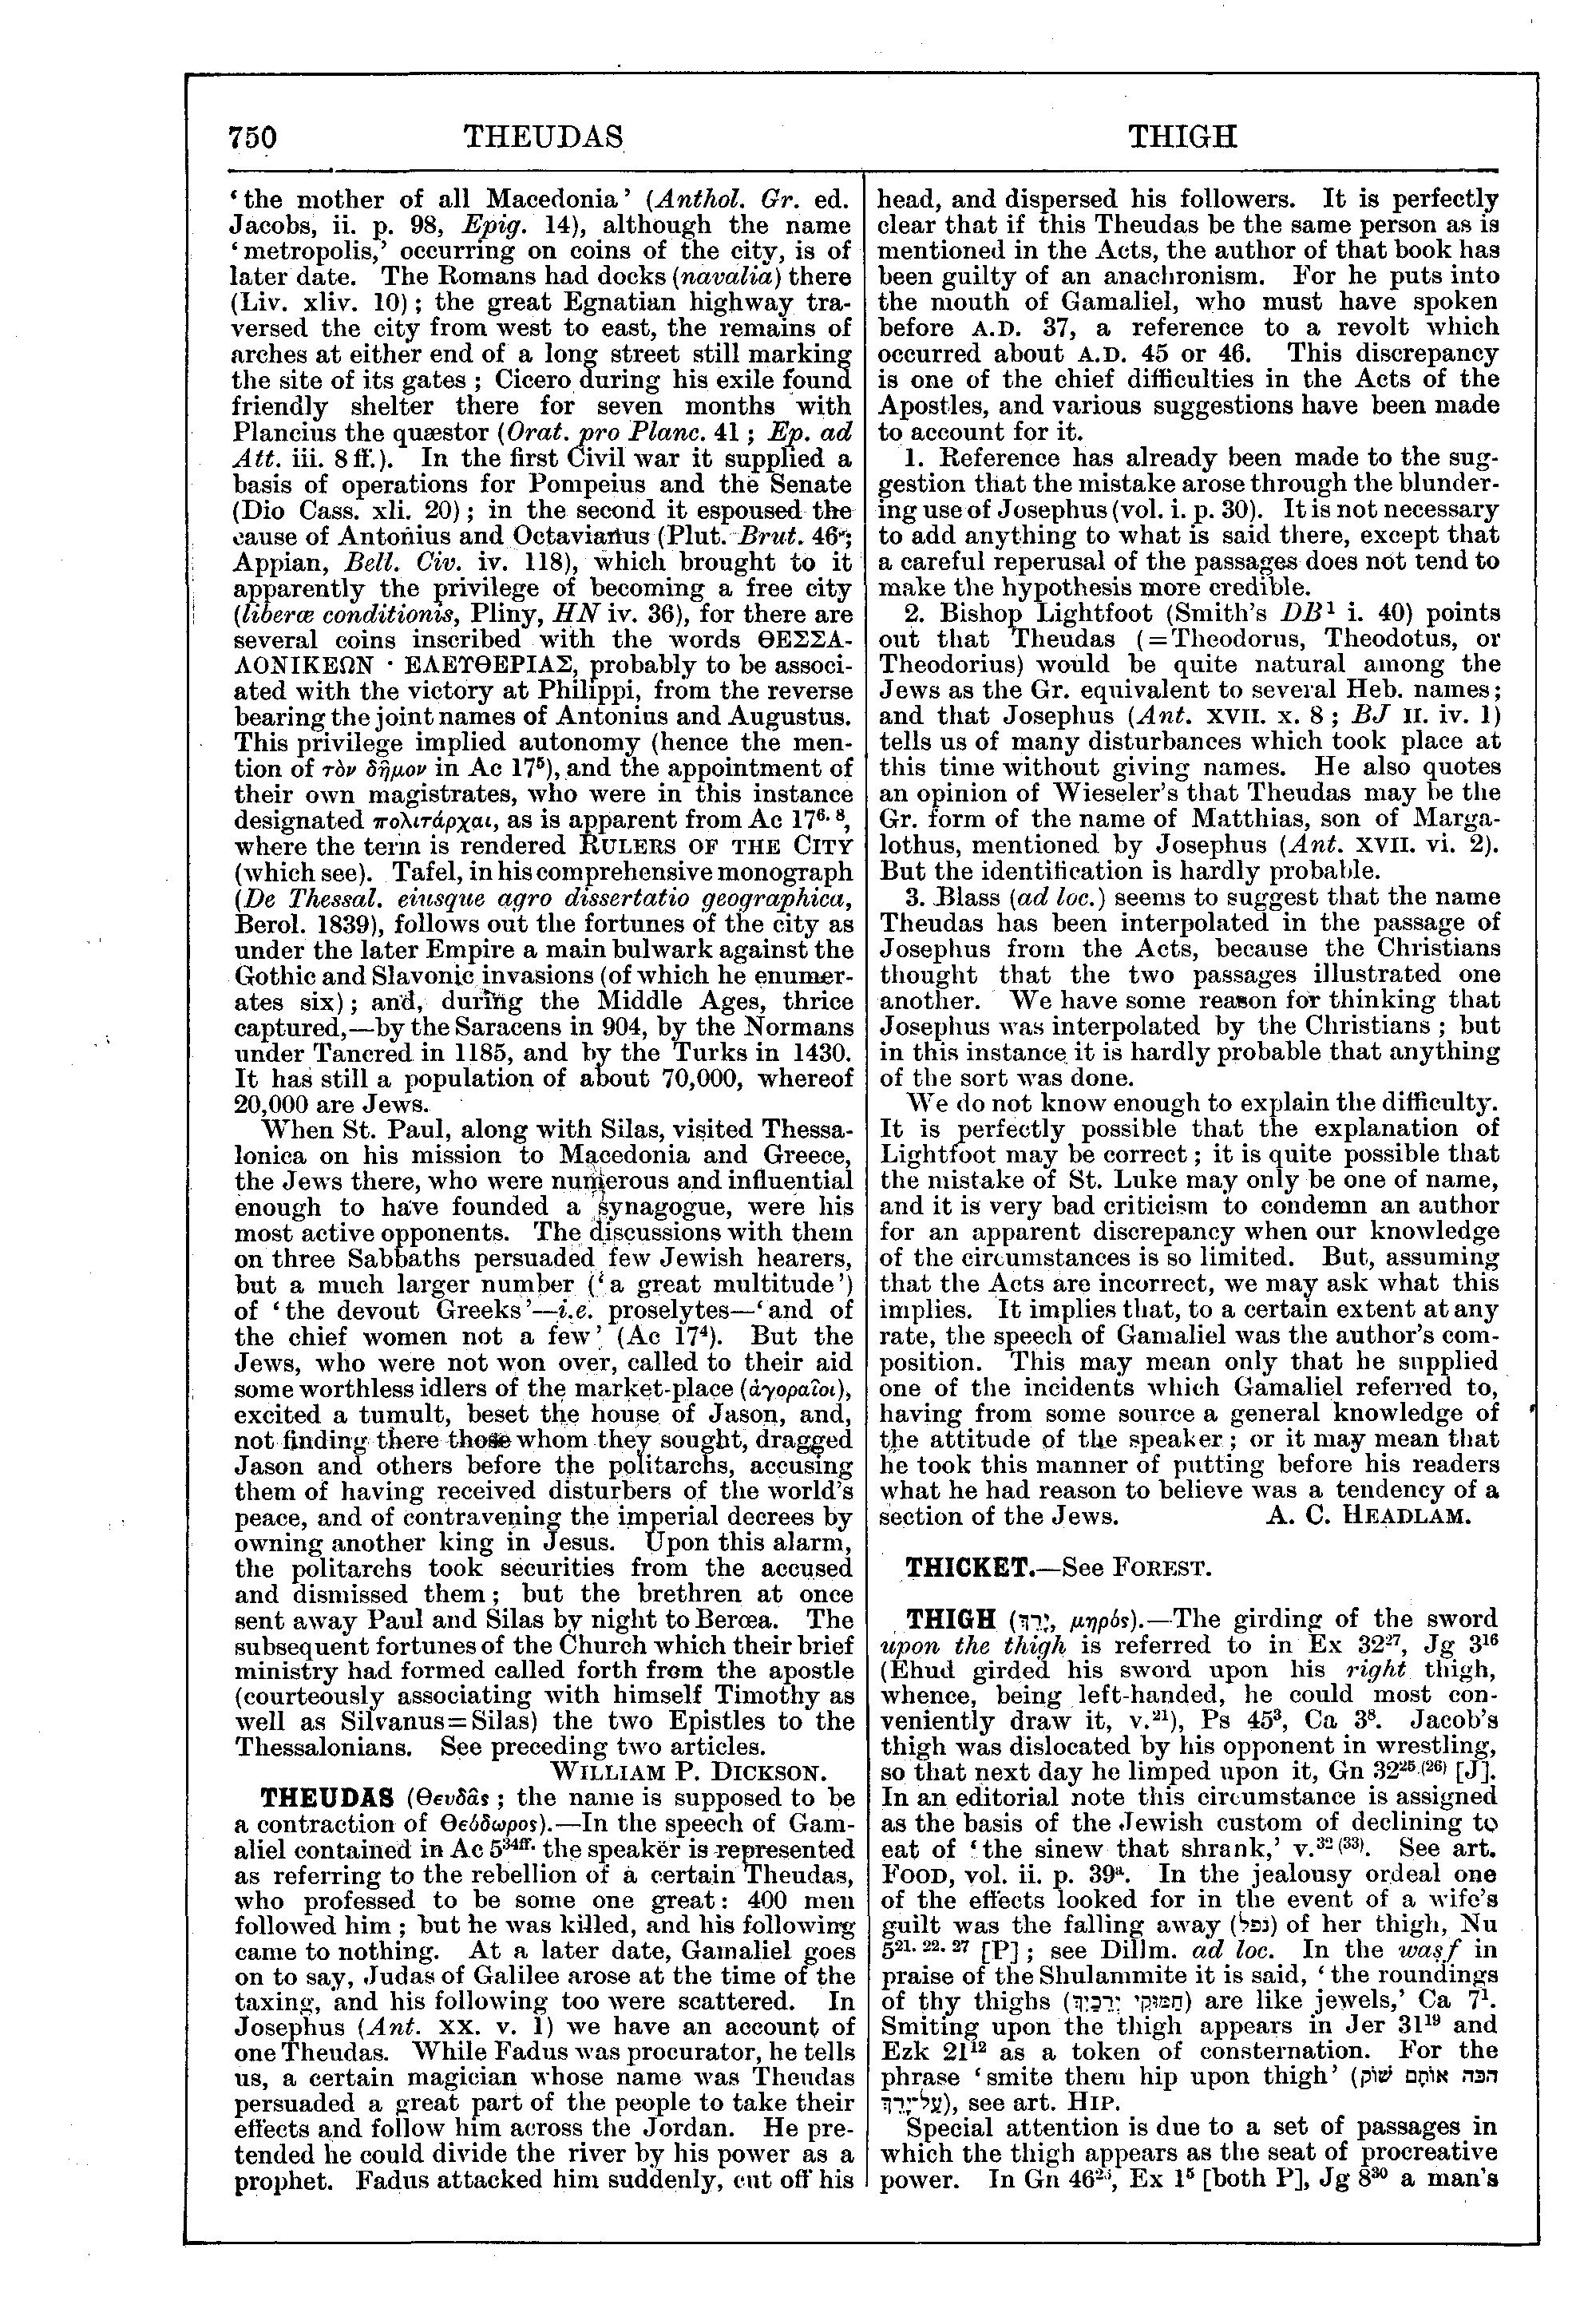 Image of page 750